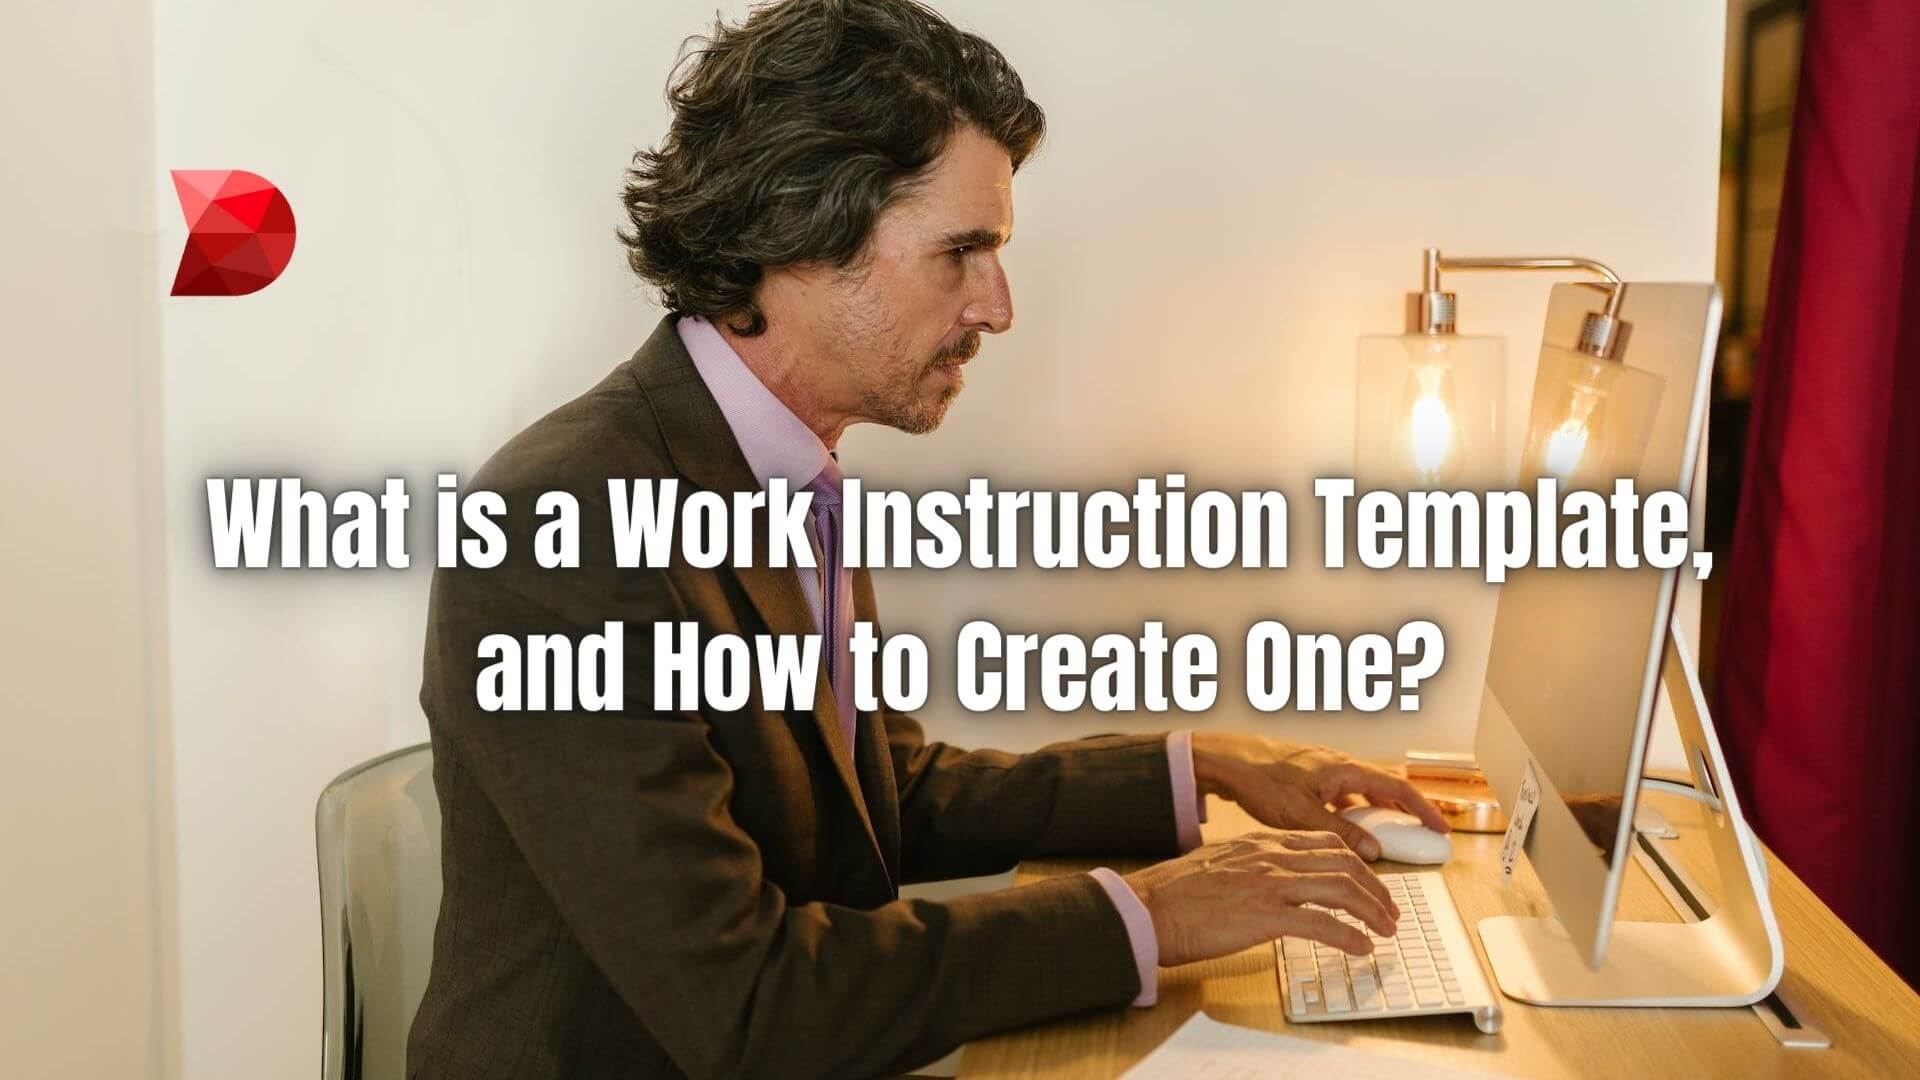 Simplify workflows and boost productivity now! Click here to learn step-by-step how to develop an effective work instruction template.